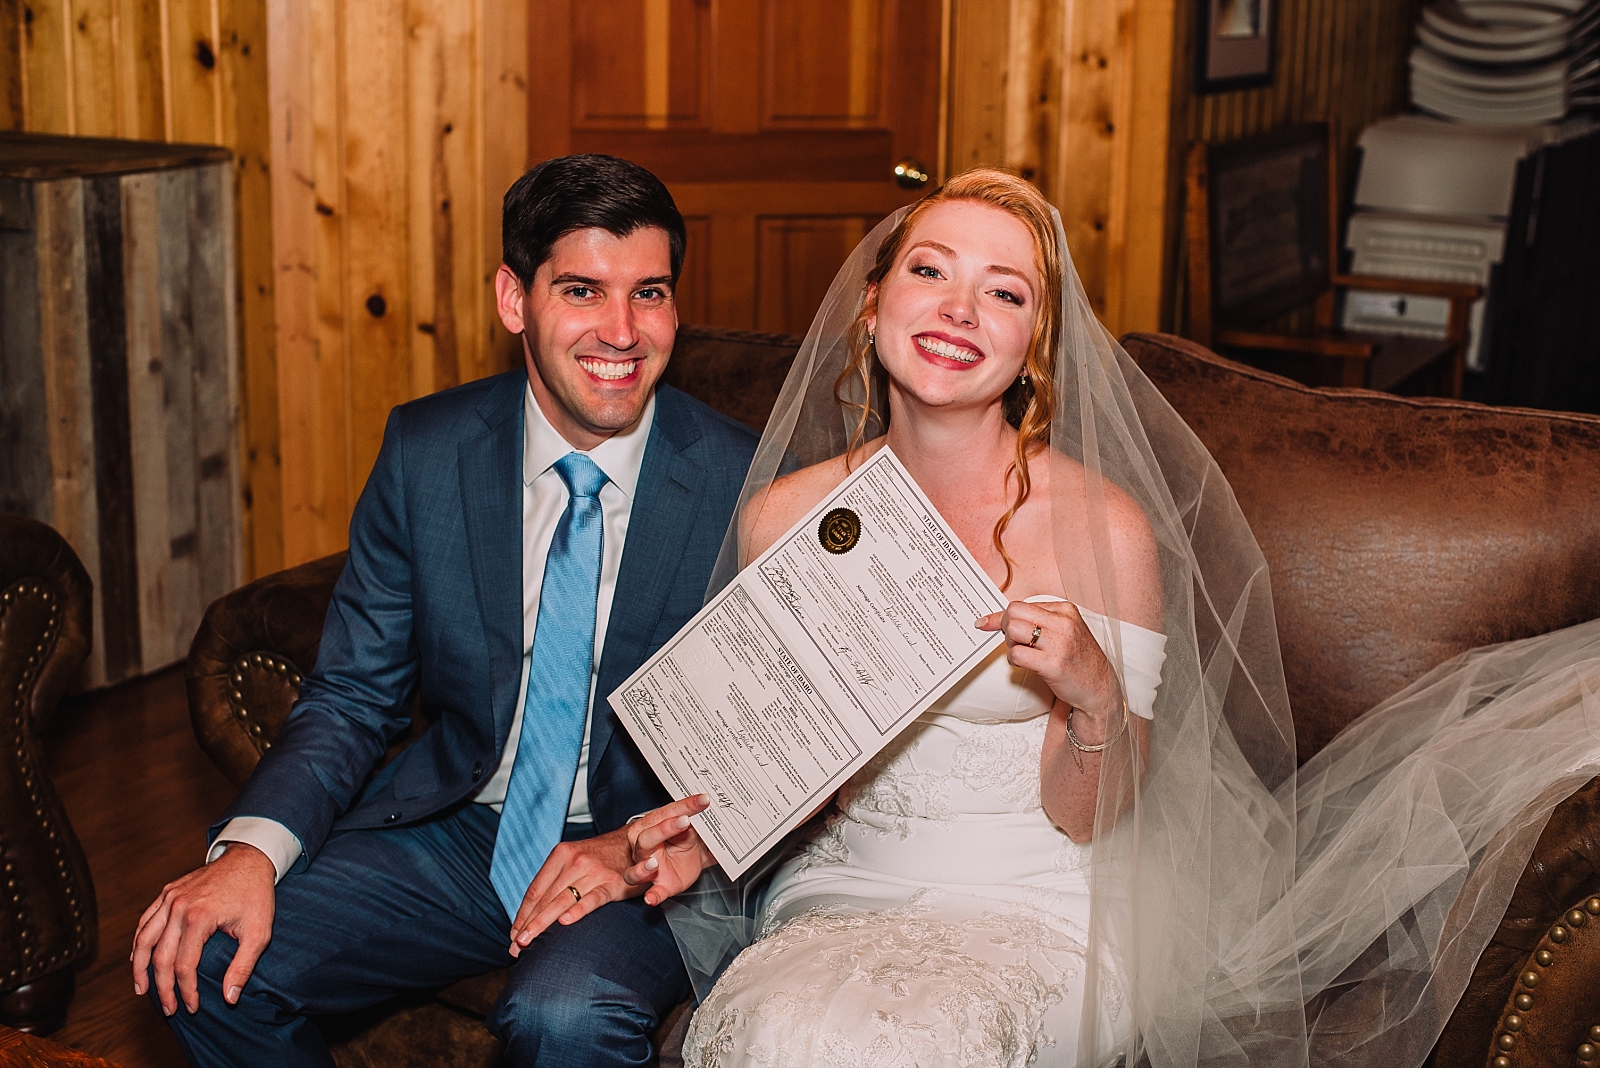 bride and groom with wedding certificate